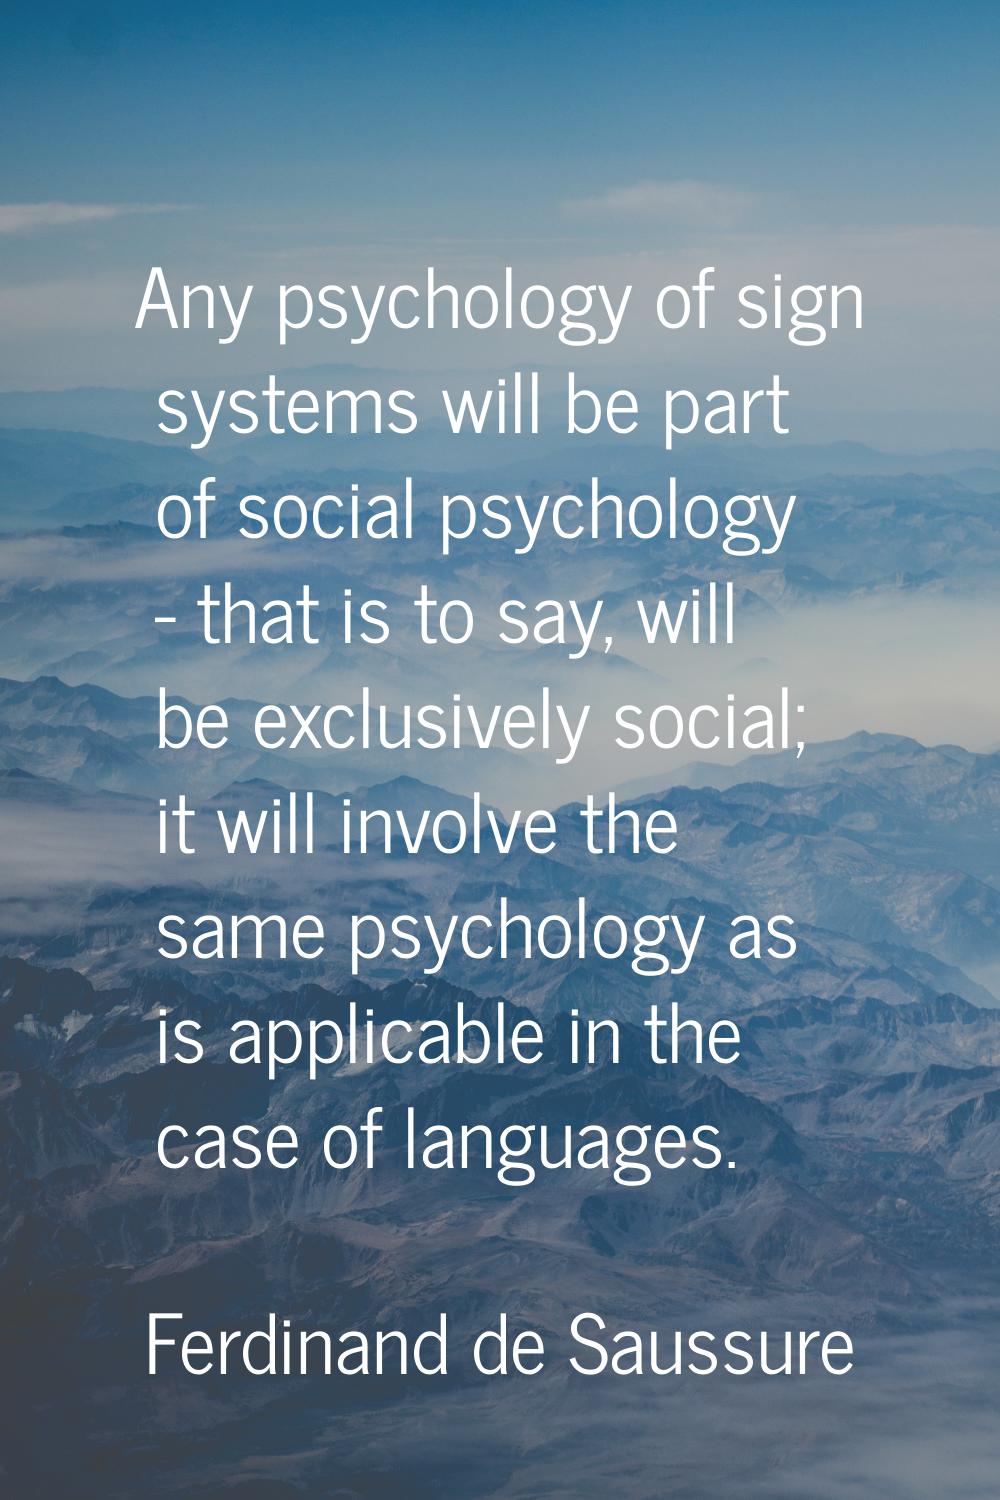 Any psychology of sign systems will be part of social psychology - that is to say, will be exclusiv